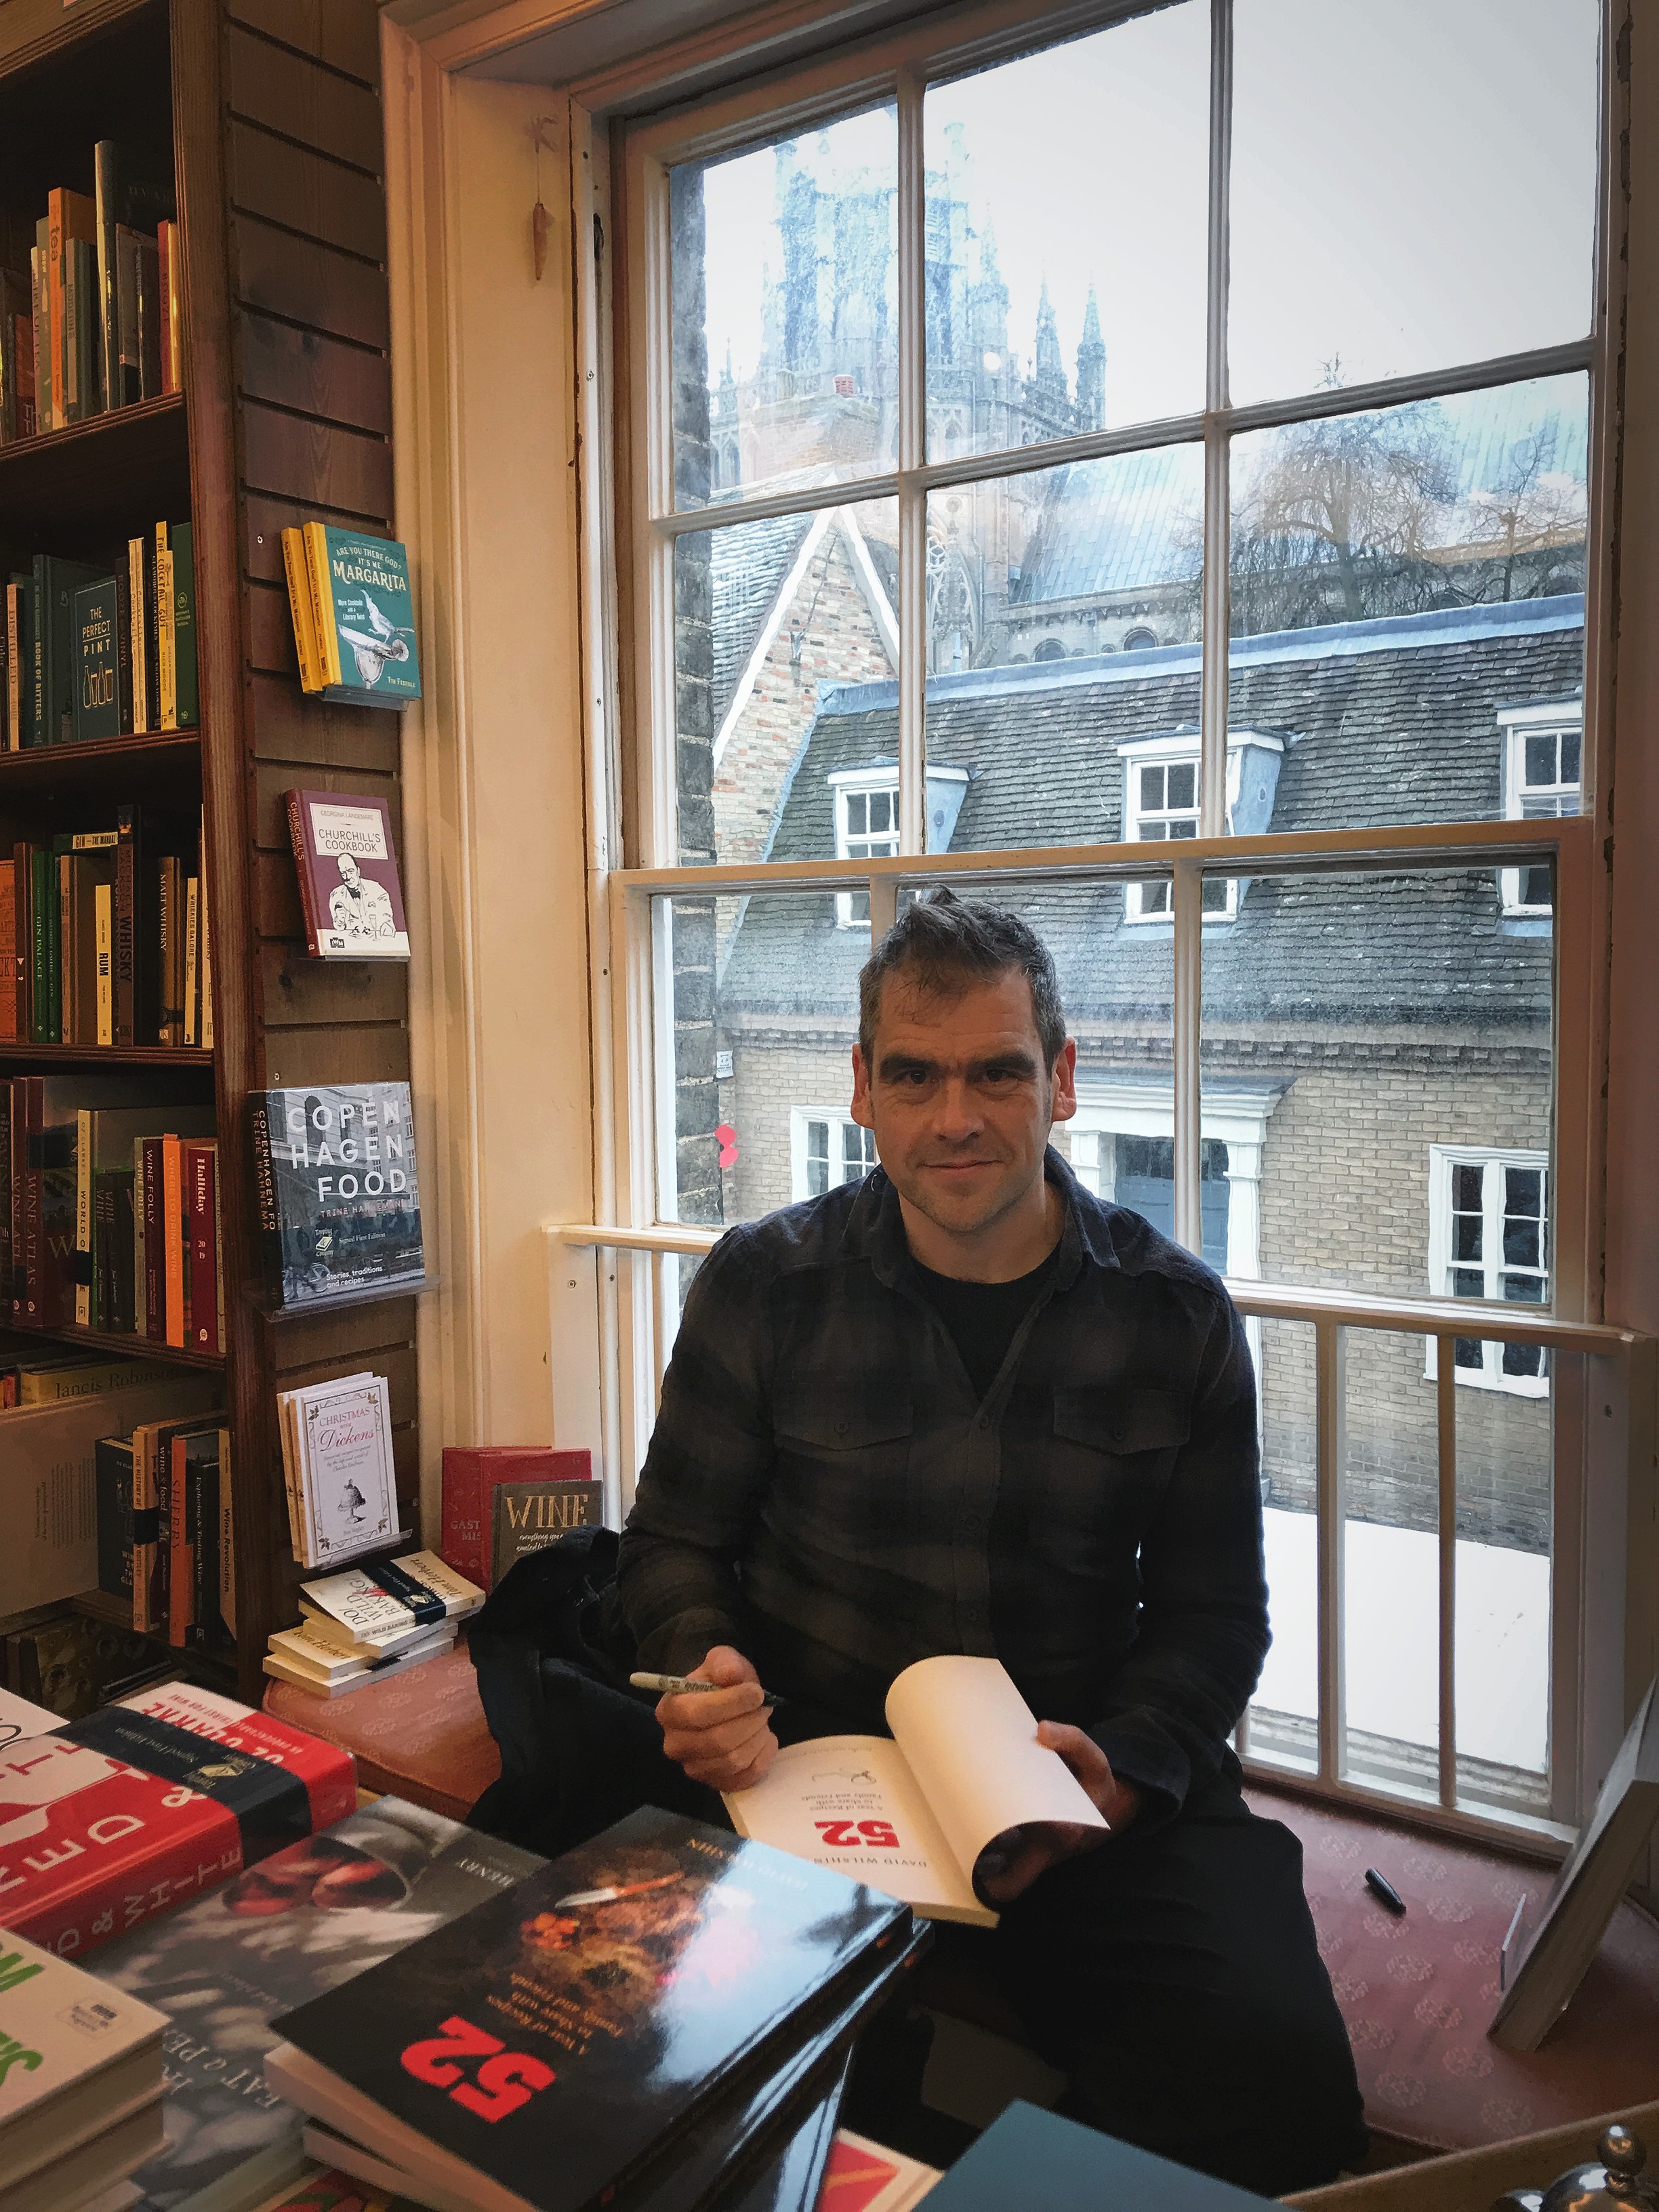 David Wilshin Attended a Book Signing Event at Topping & Company Booksellers of Ely